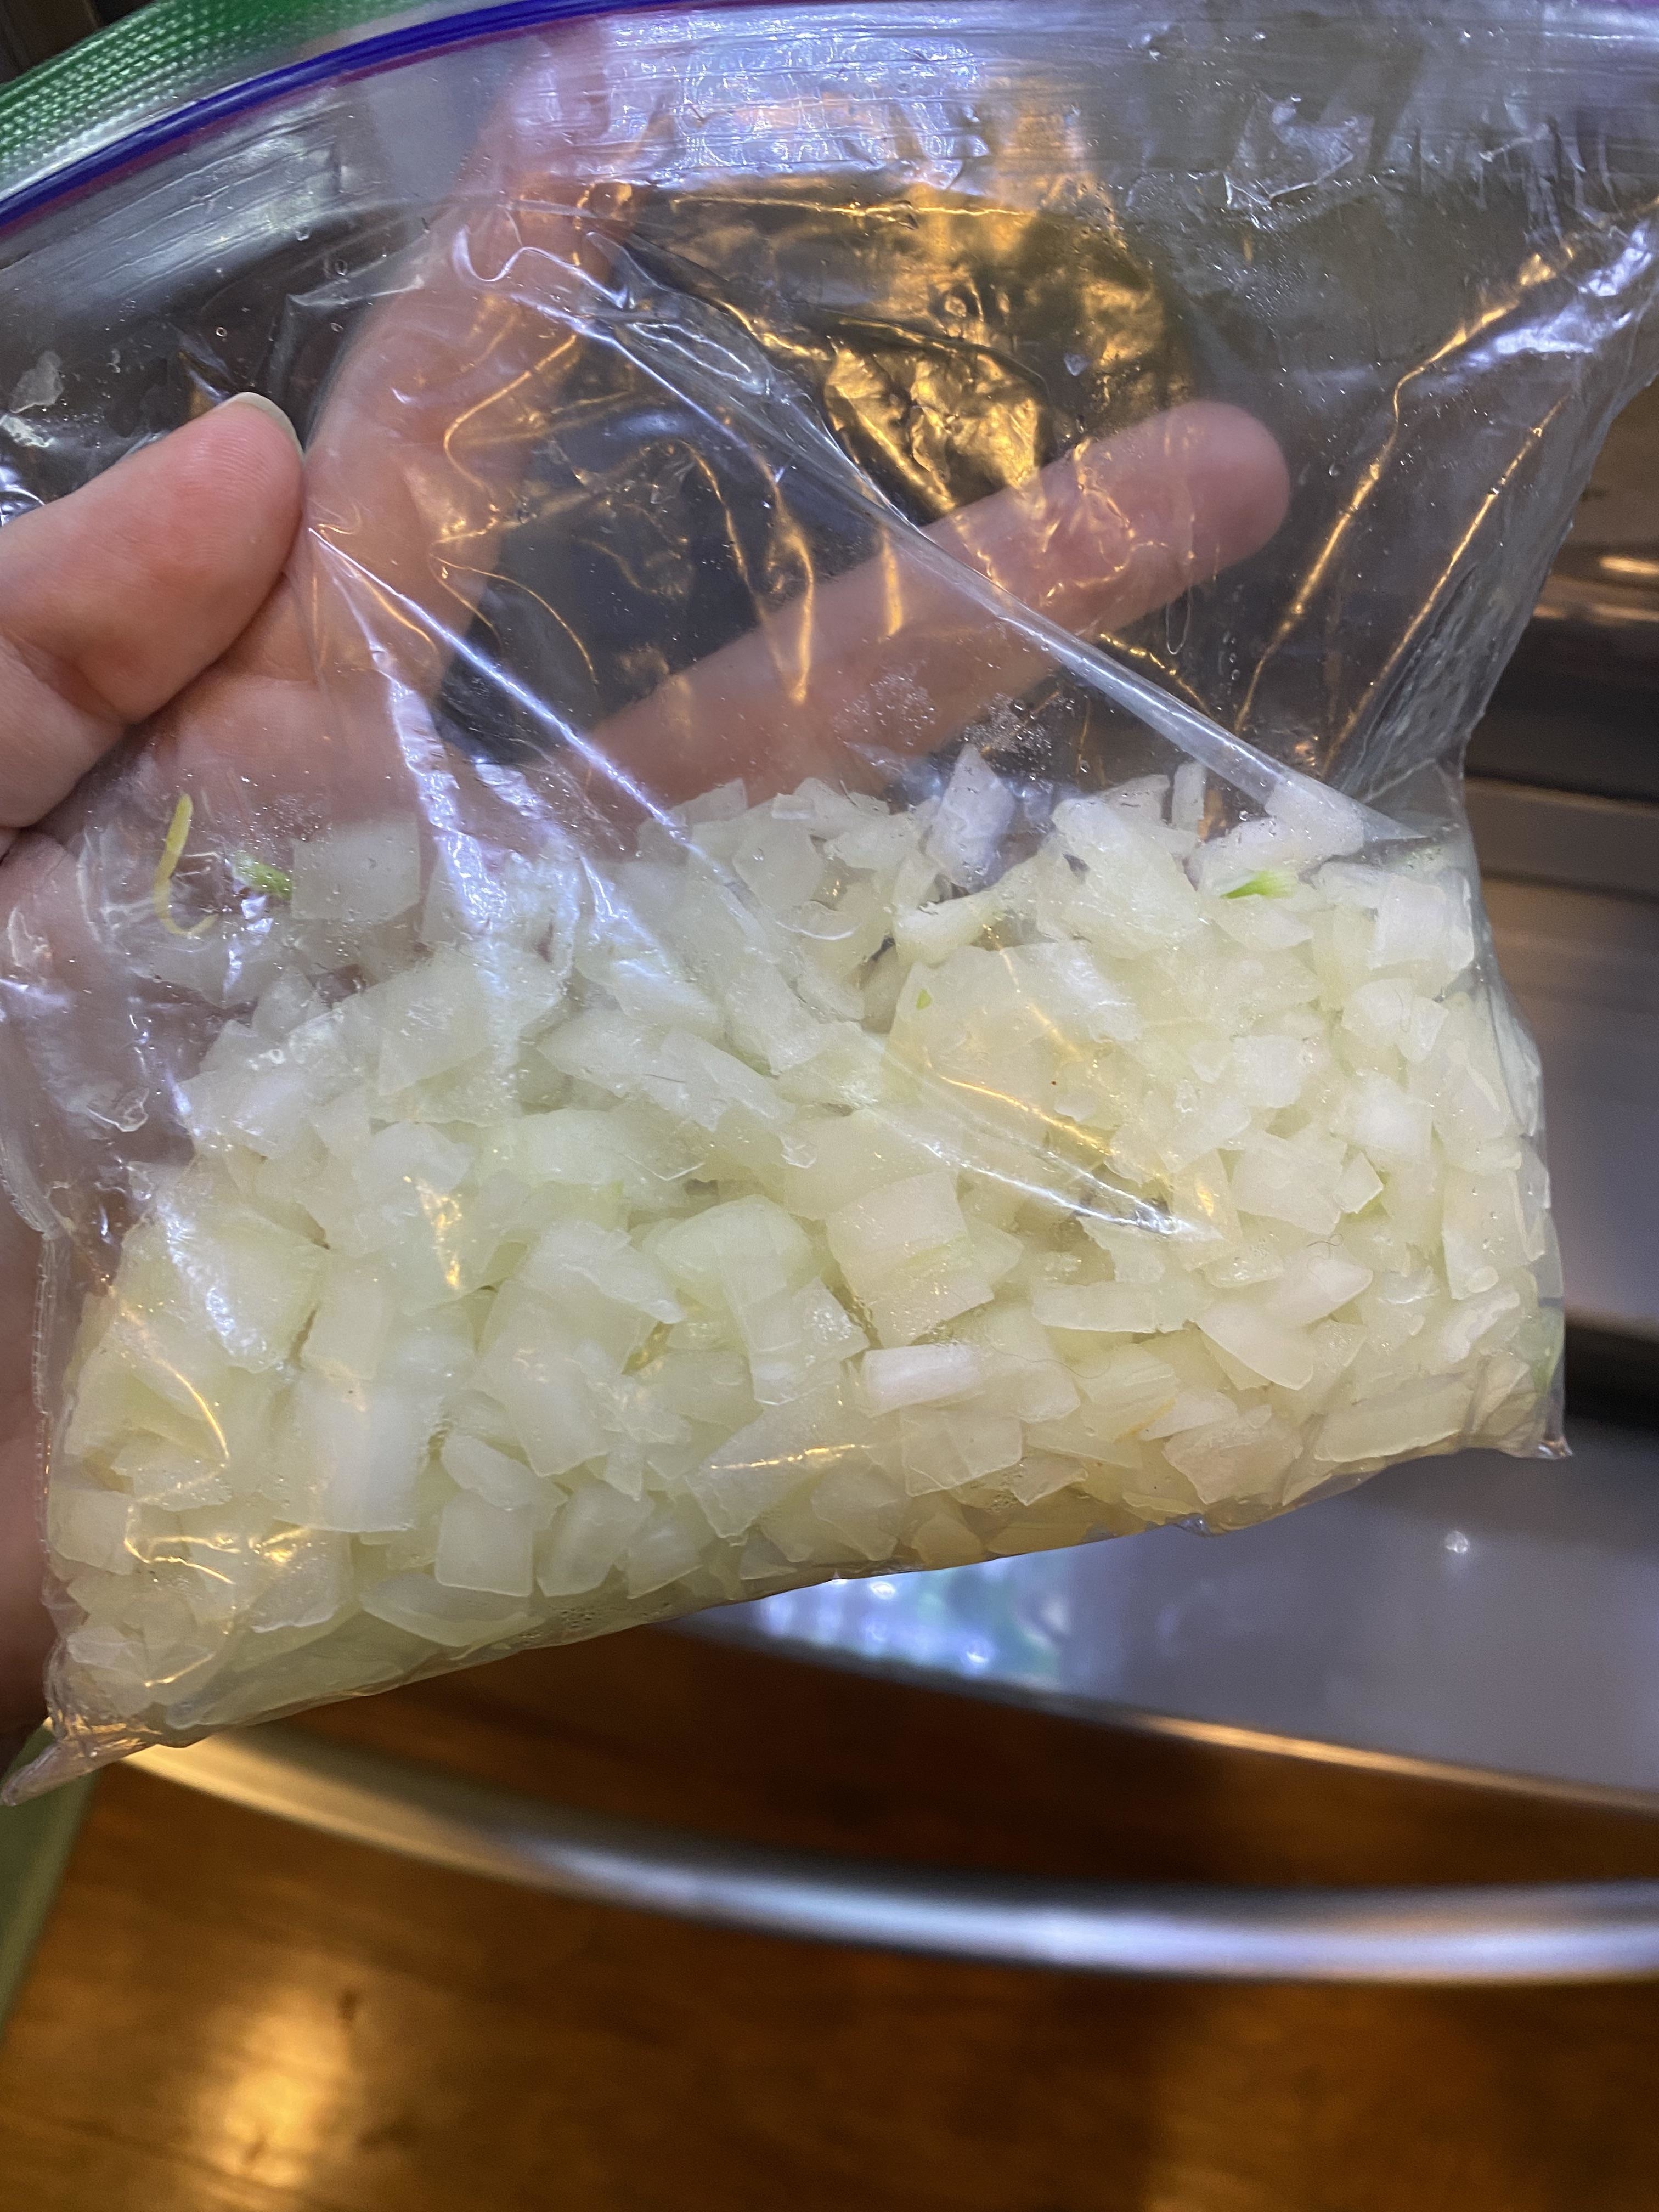 Diced onion in a freezer bag